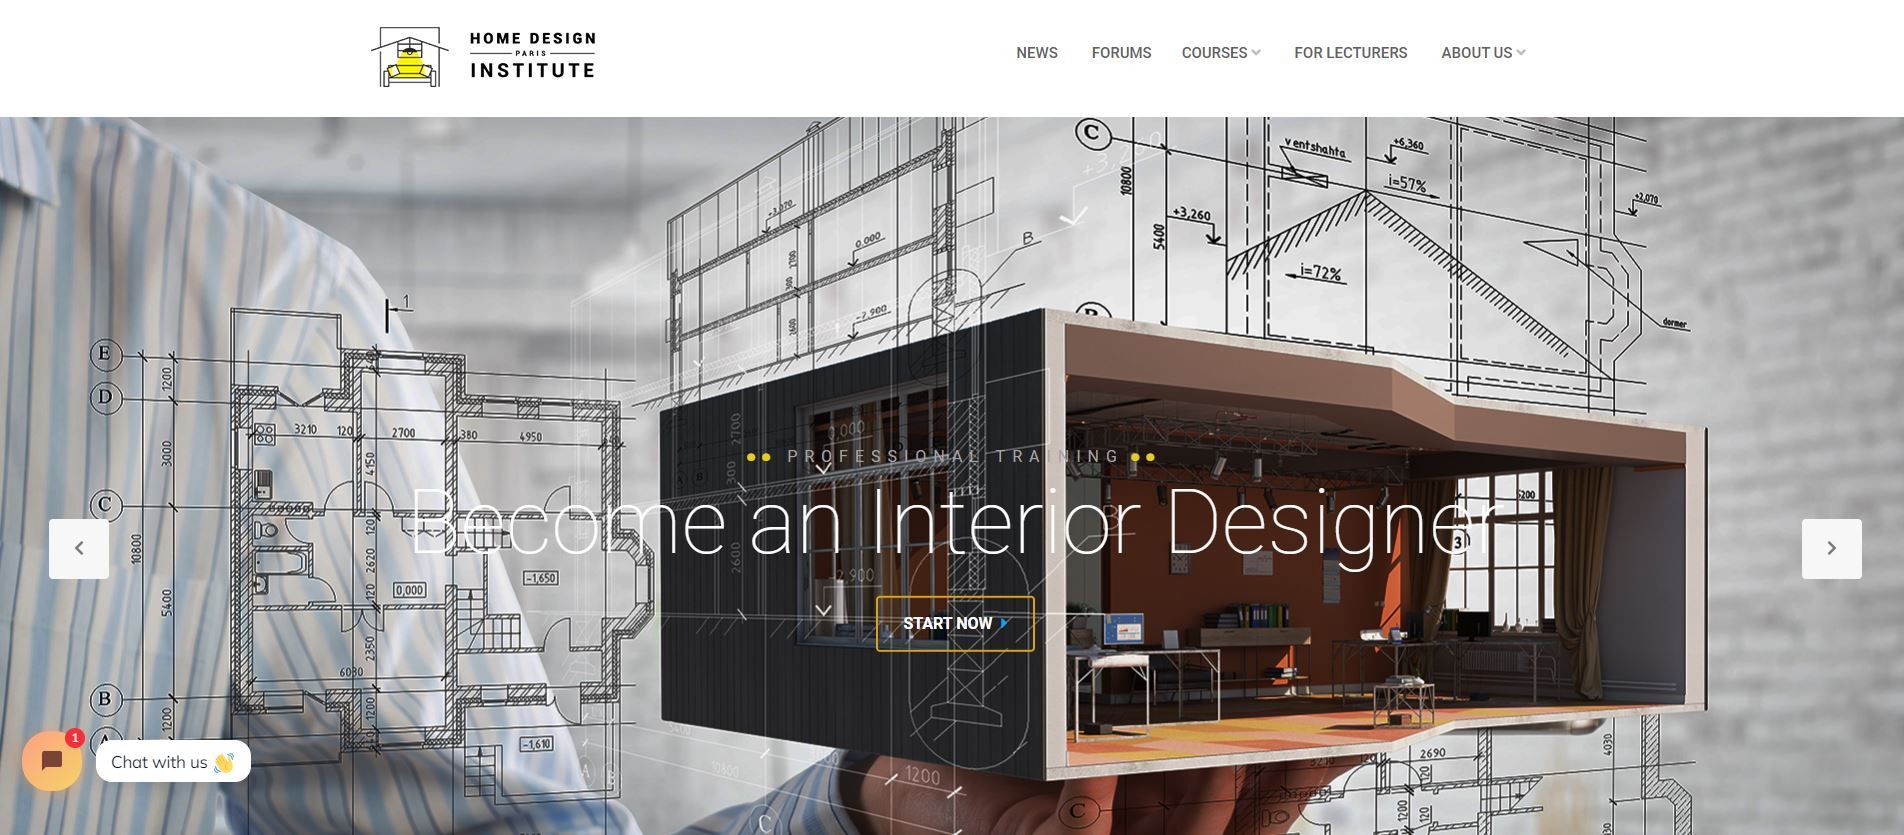 A Screenshot of the Home Design Institute - Paris s Landing Page